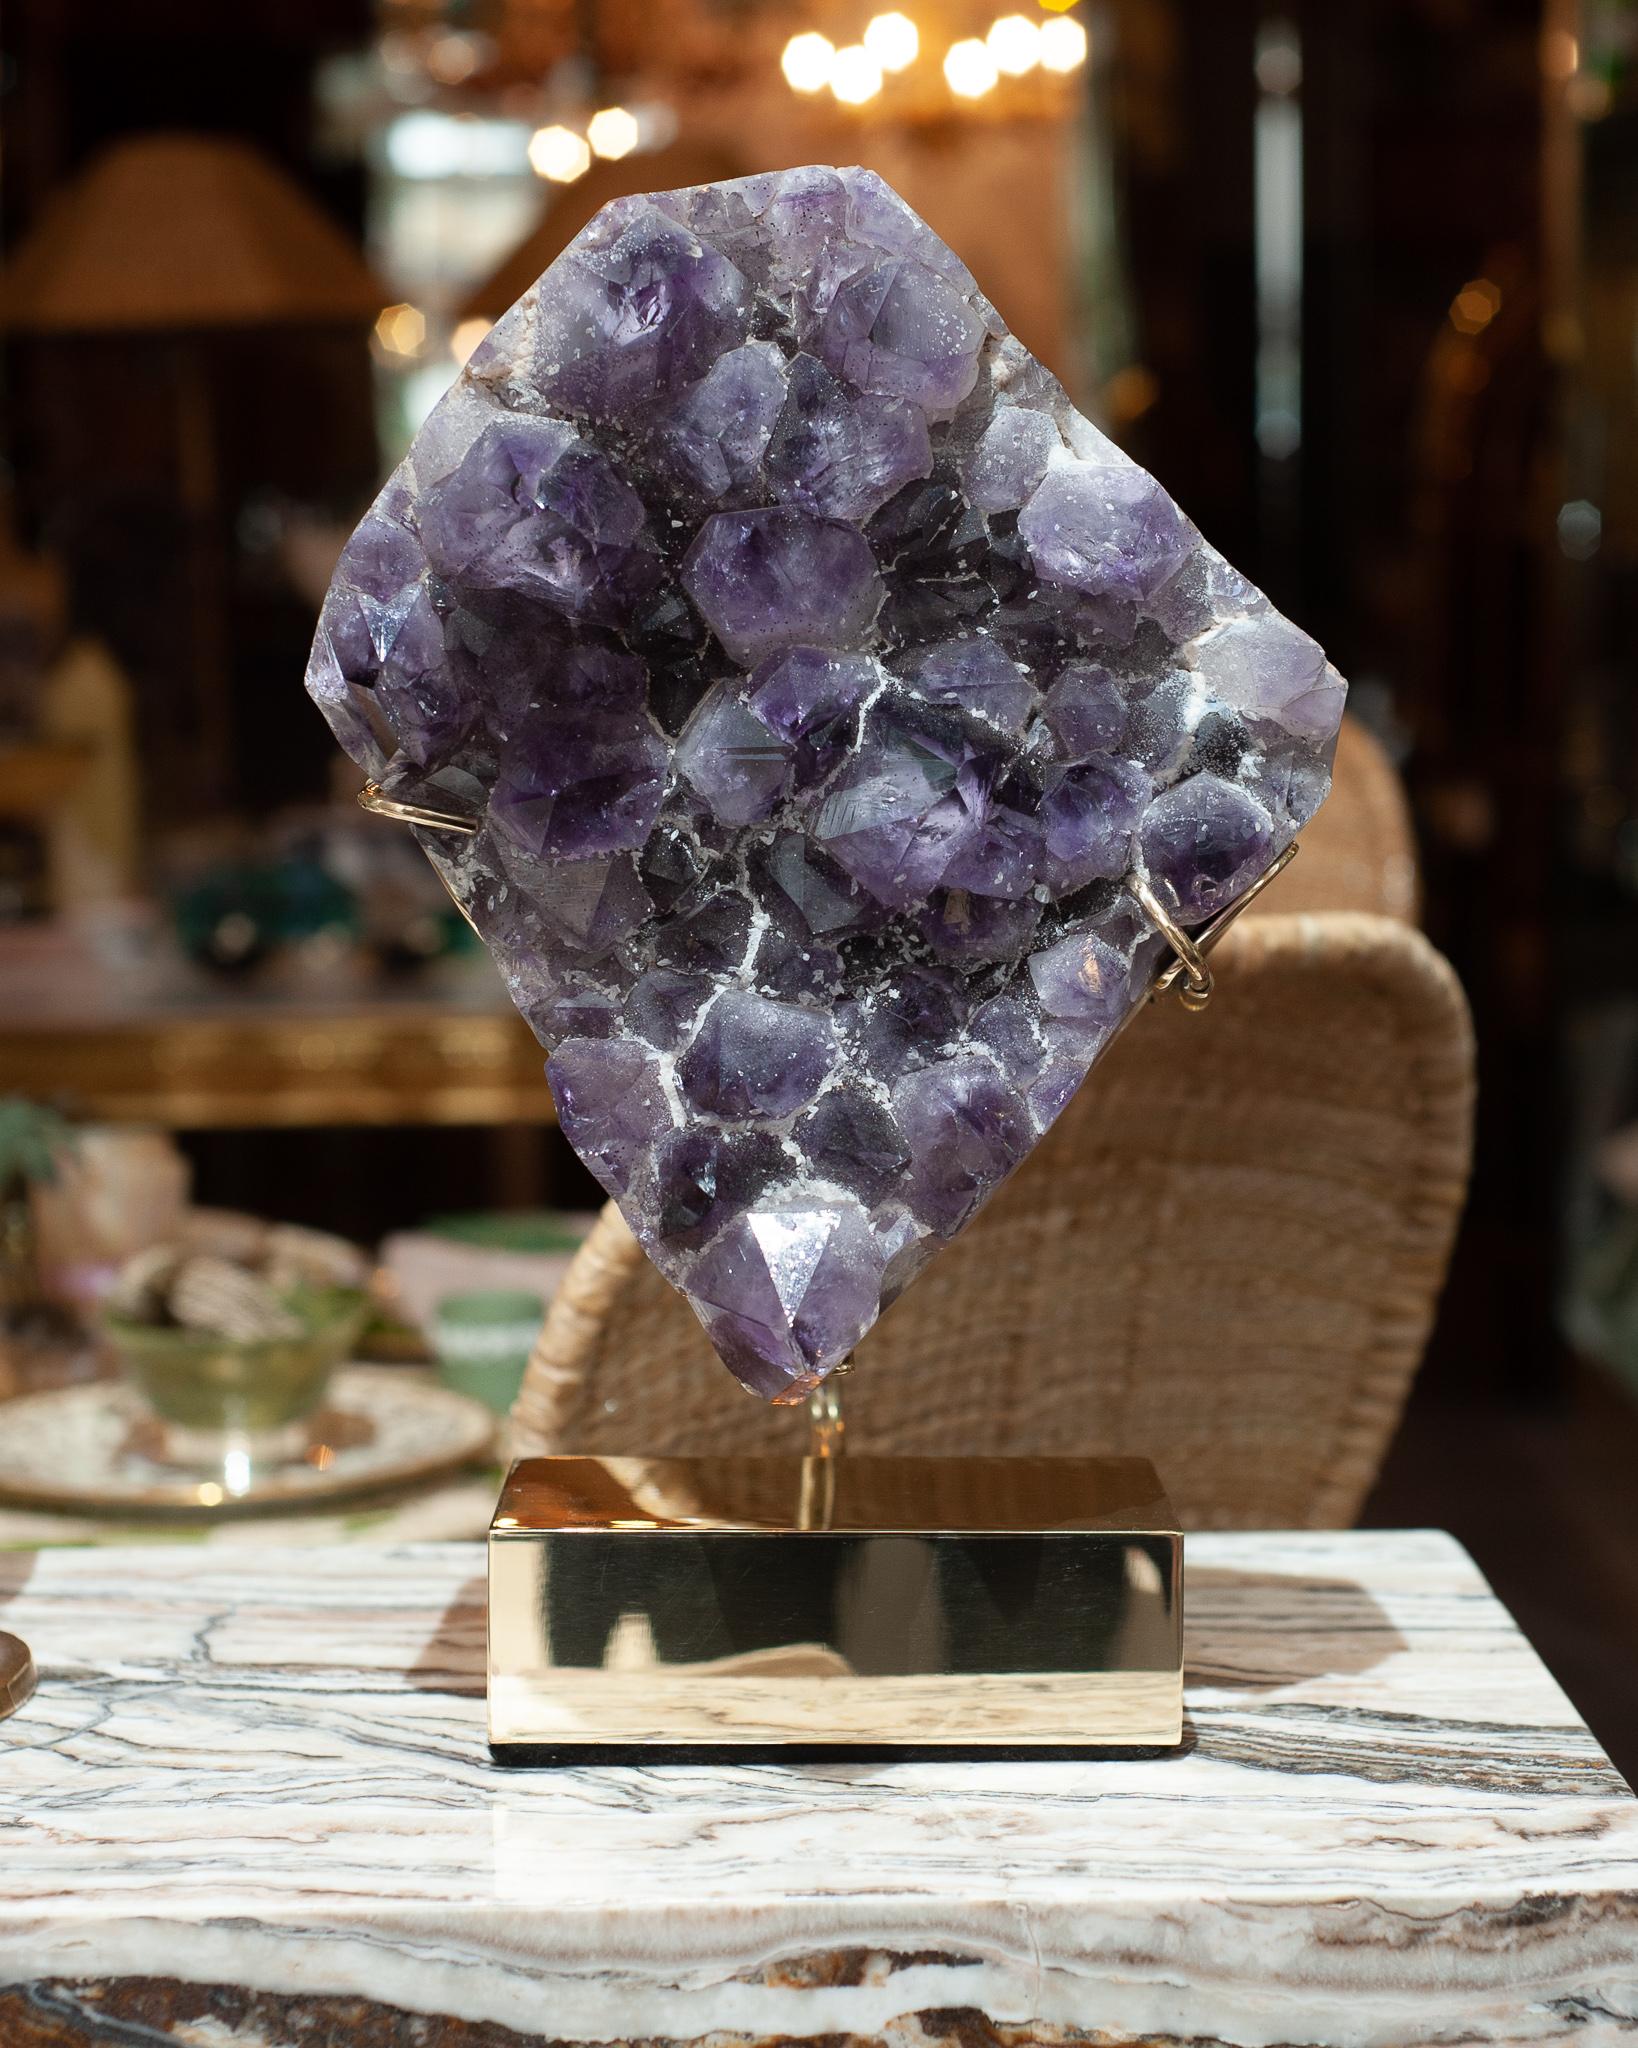 A gorgeous massive amethyst specimen mounted on a custom polished brass base by Studio Maison Nurita. A natural thick piece of amethyst is suspended by the specialized mounting, creating both an energetic and highly decorative interior item for the